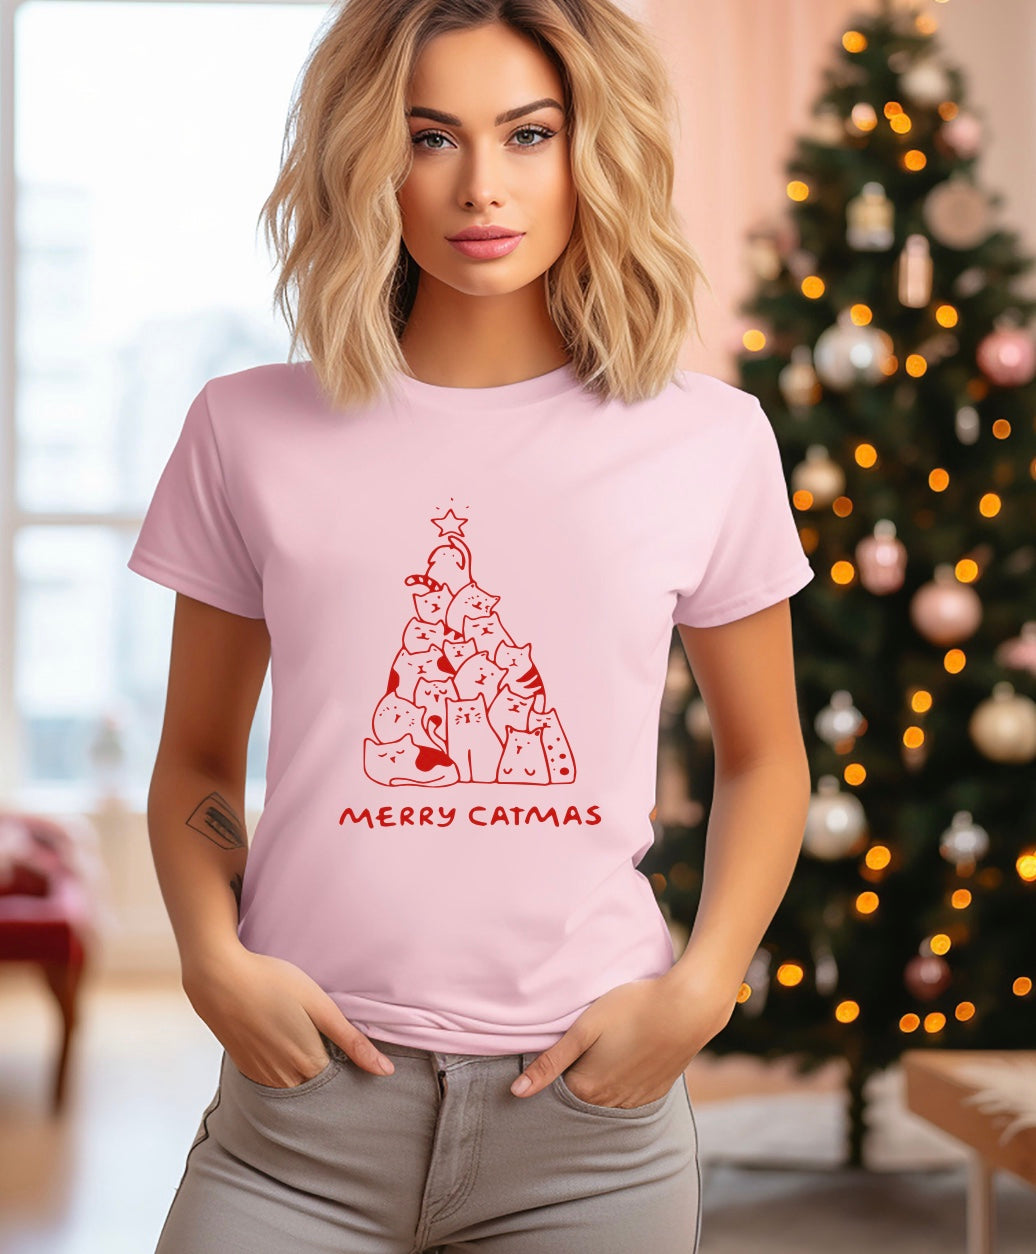 merry catmas Christmas t-shirt for cat lovers in pink